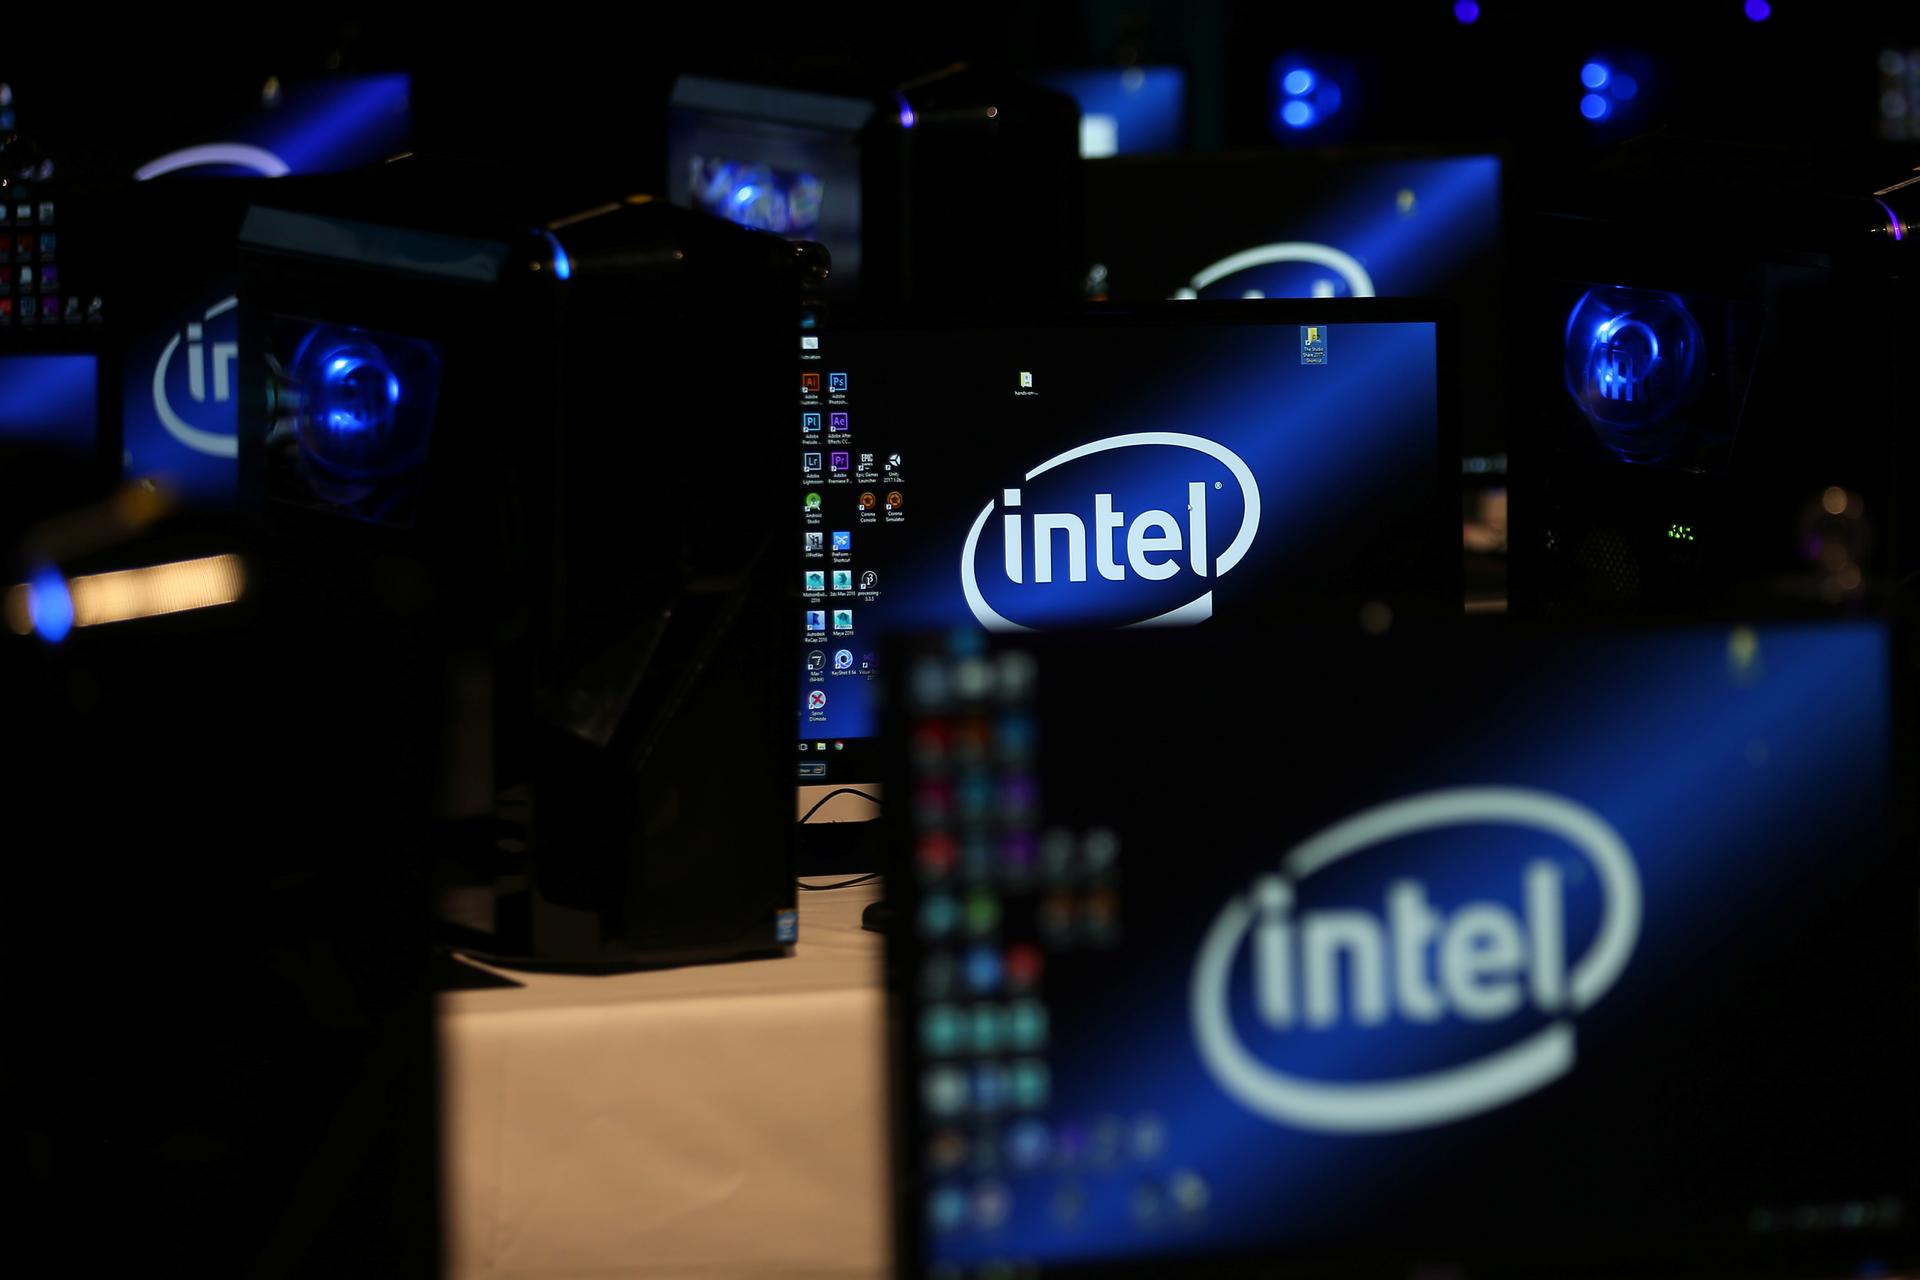 The Intel logo is displayed on computer screens.